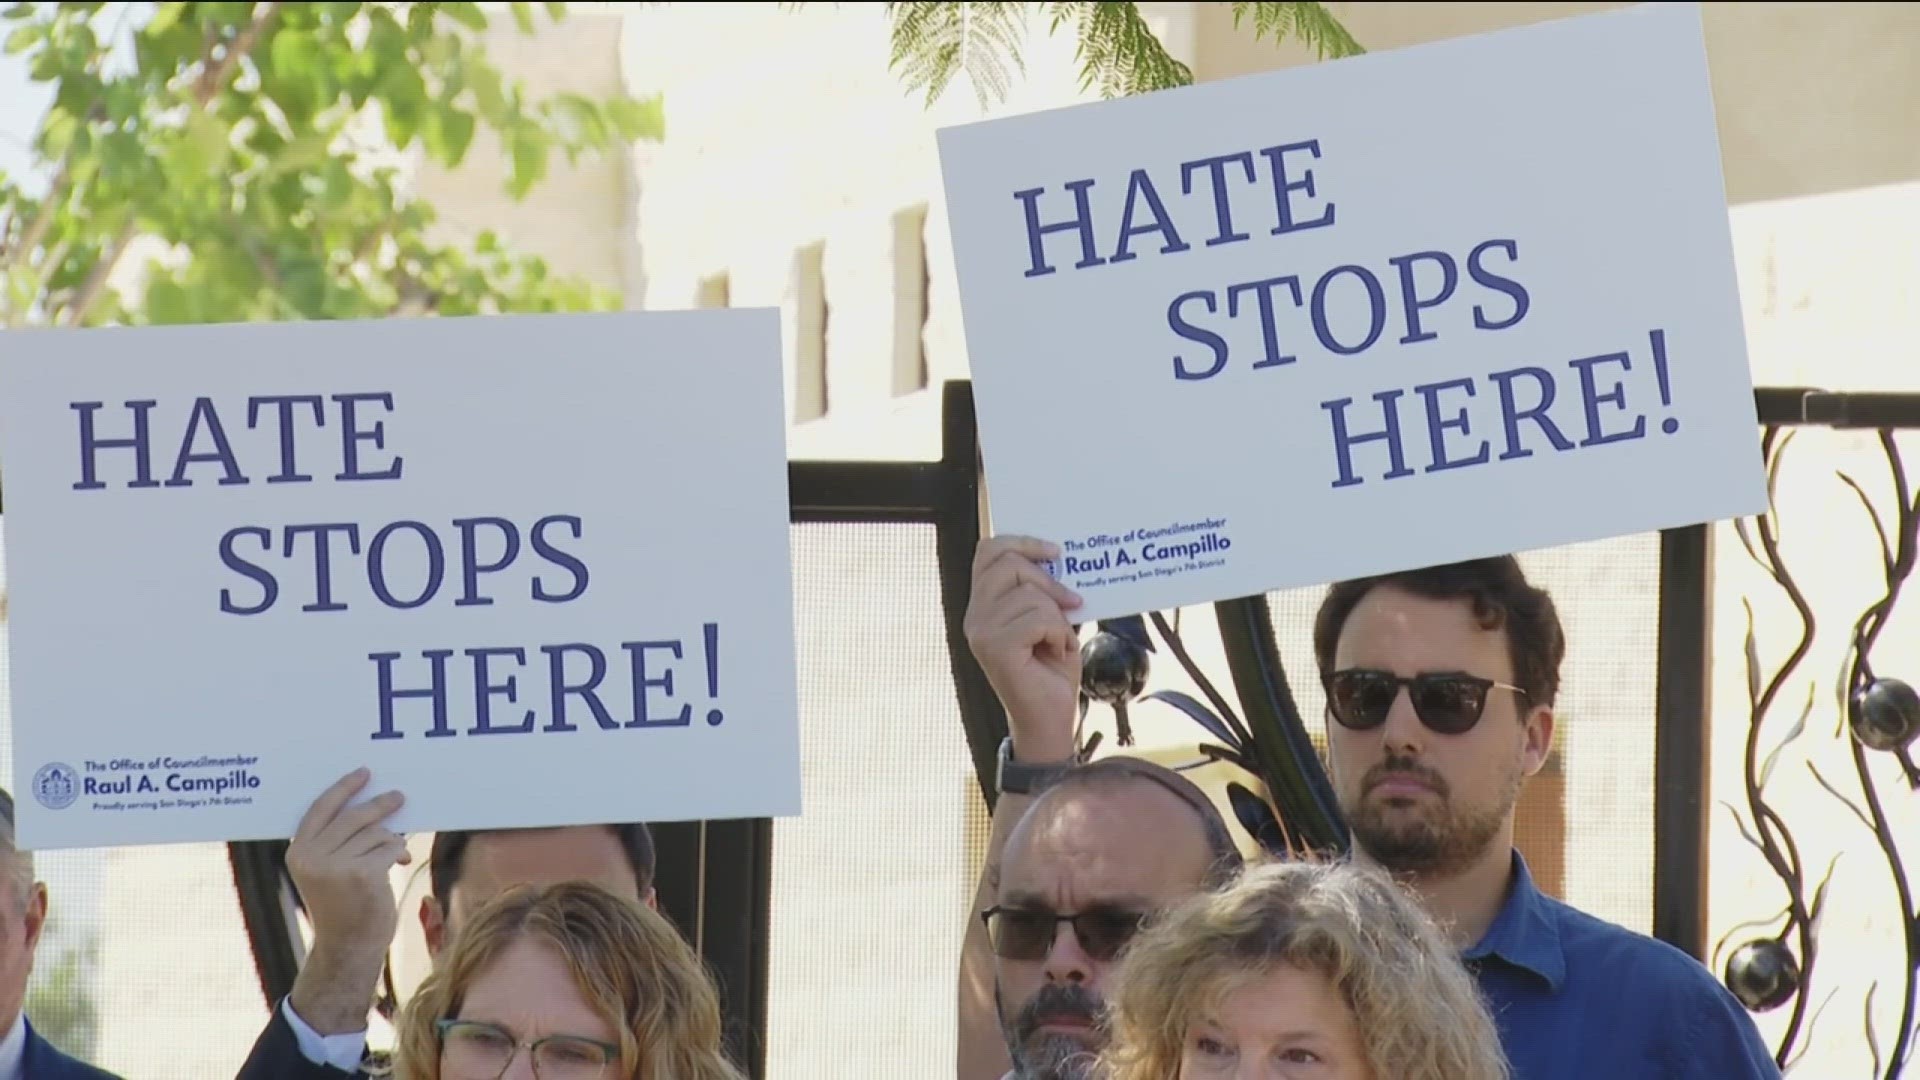 San Diego has seen an alarming rise in the number of so-called "hate littering" acts, in which extremists flood neighborhoods with anti-Semitic and anti-LGBT fliers.